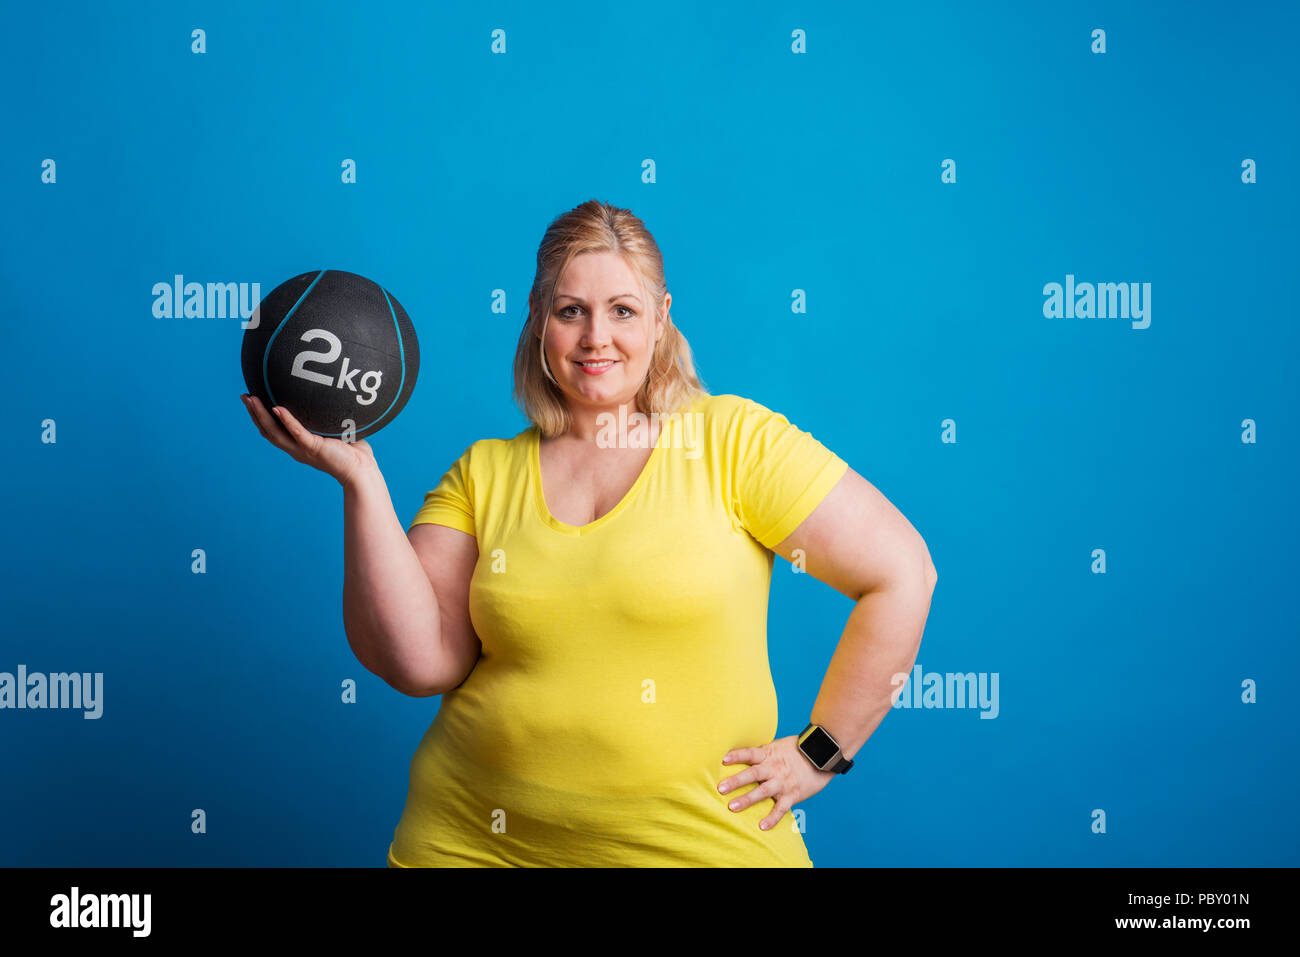 Portrait of a happy overweight woman holding a heavy ball in studio. Stock Photo